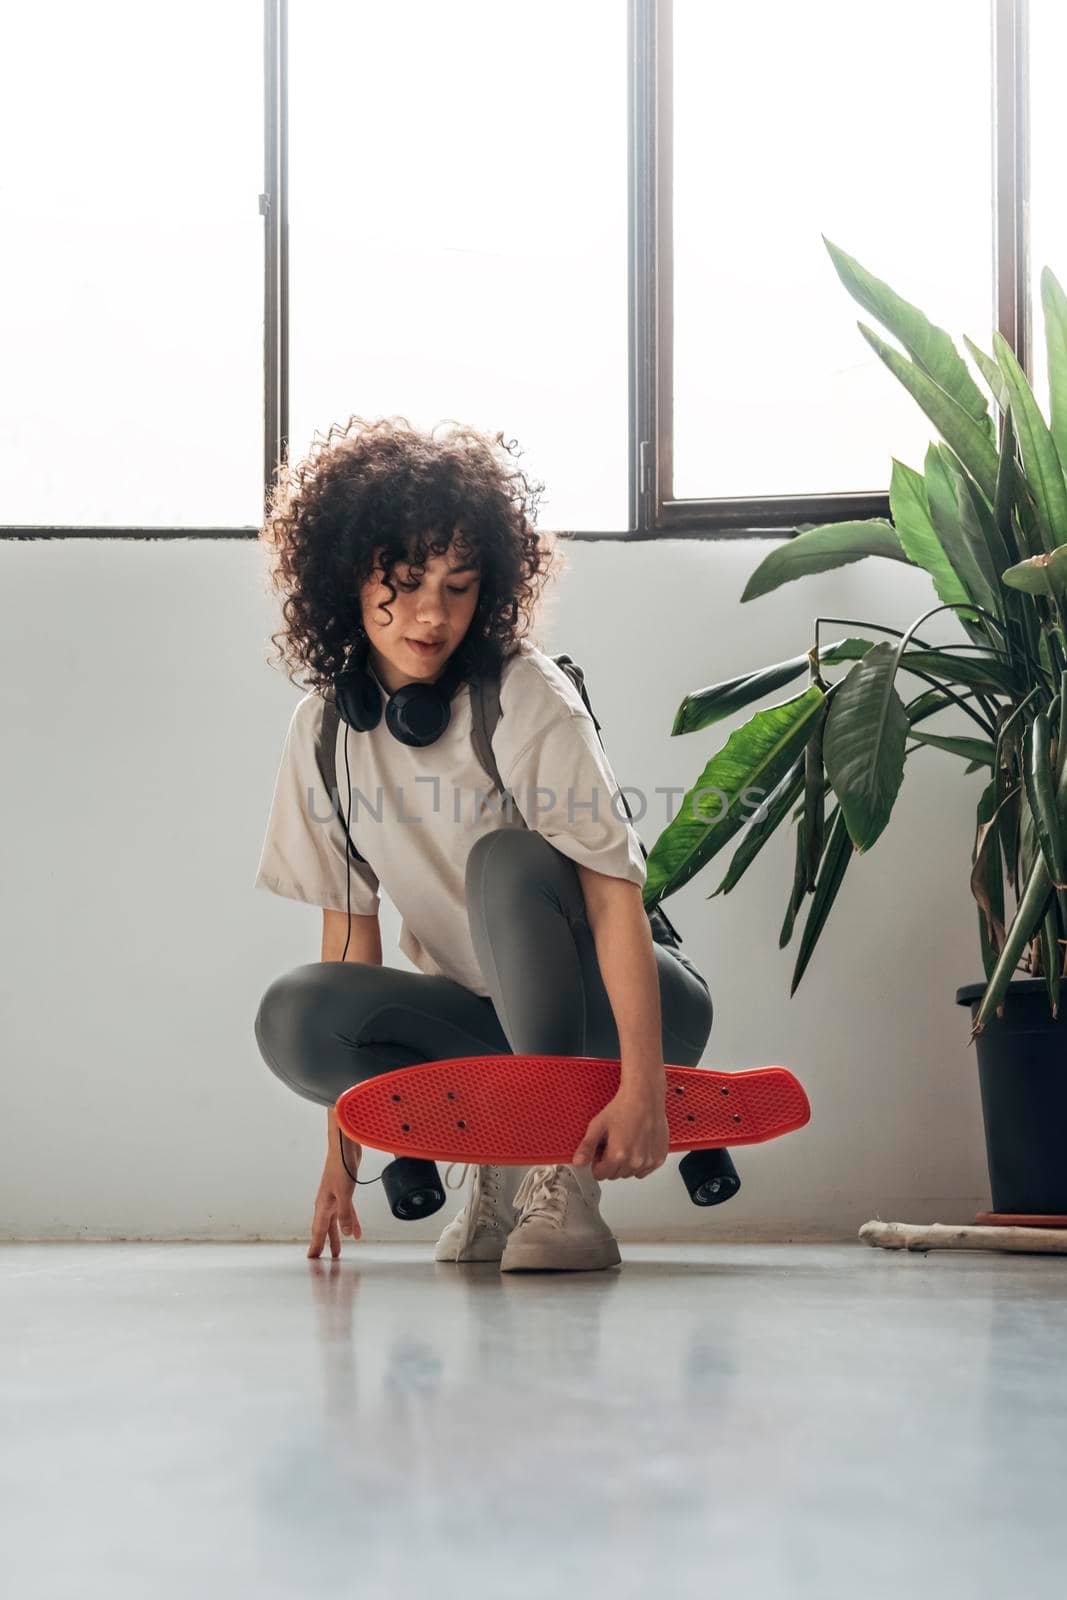 Young multiracial woman with curly hair crouching down holding a red skateboard looking down. Sport concept.